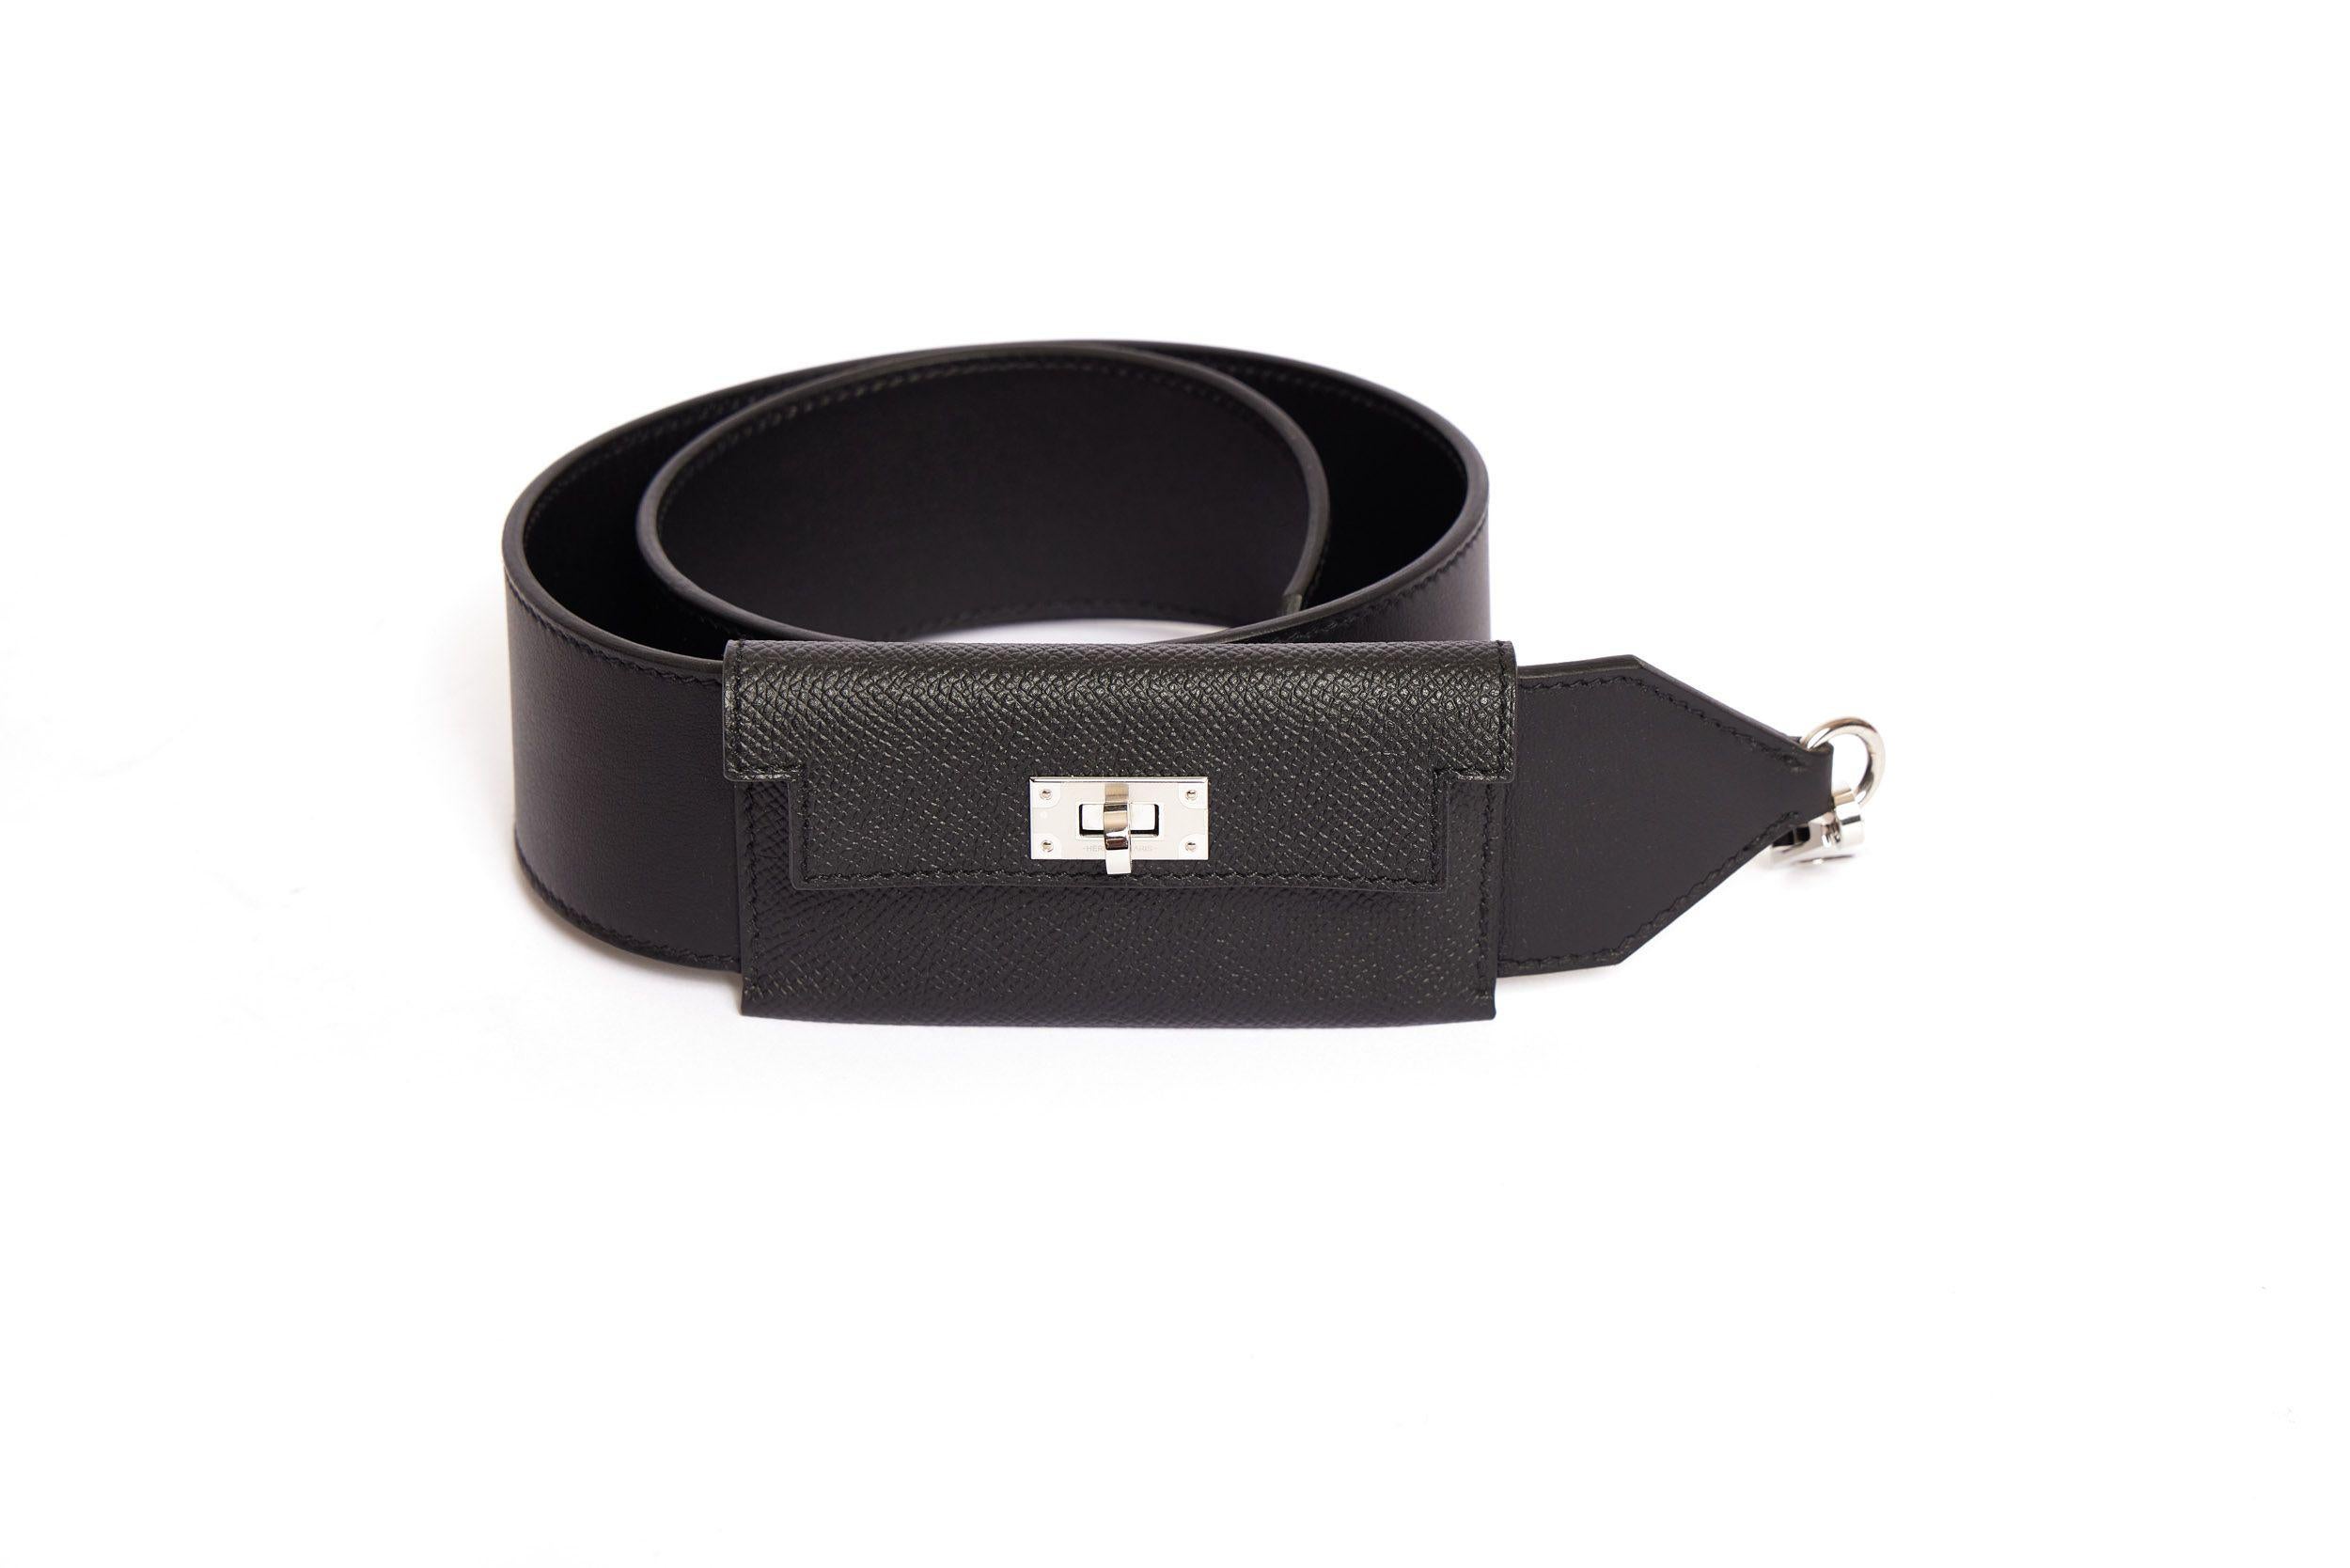 New Hermes Bandouliere Kelly black leather shoulder strap. Black leather pocket with palladium metal closure. Comes with booklet, original box and dust cover Pocket dimensions: 4.30